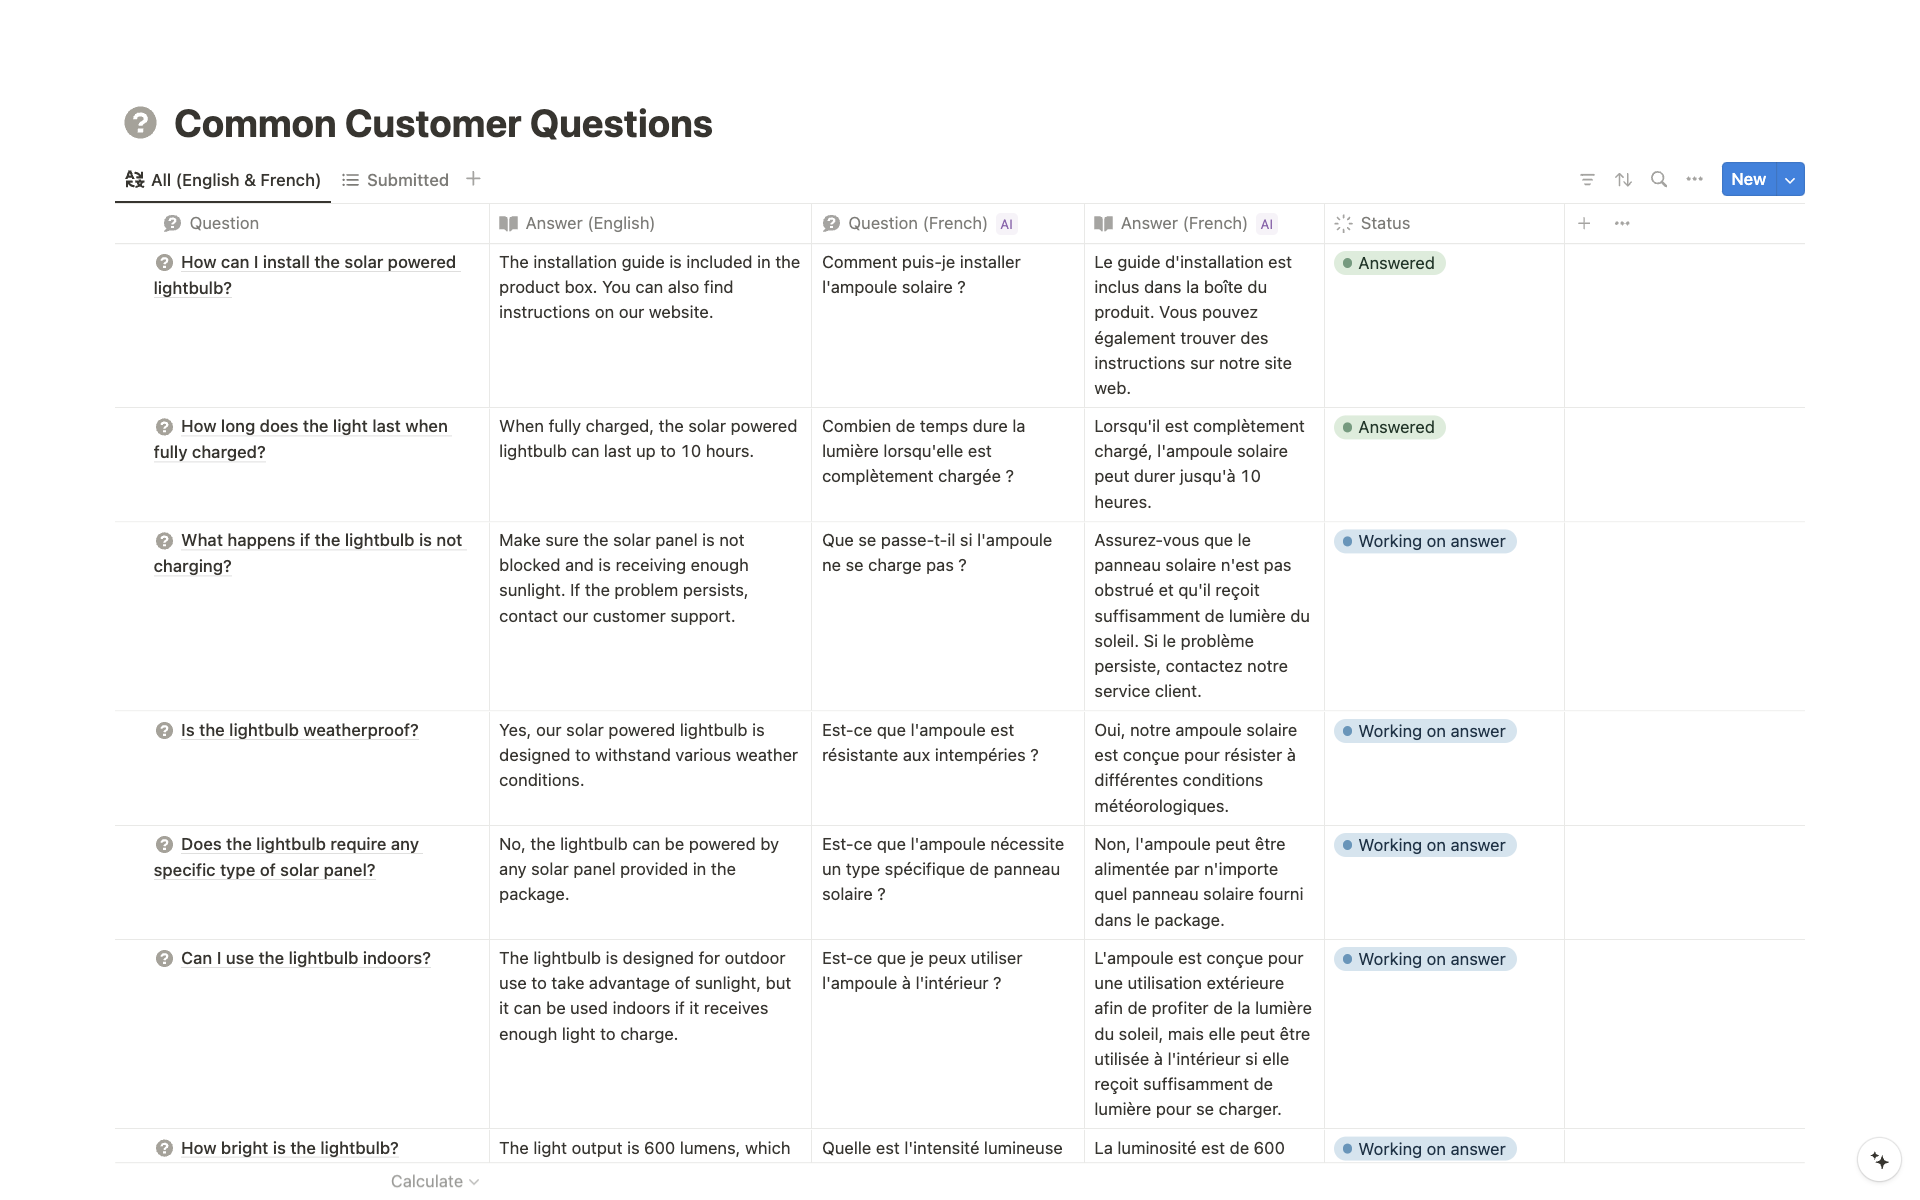 Empower your customer support team with this AI-powered Customer Support Hub template to streamline interactions and enhance customer satisfaction.